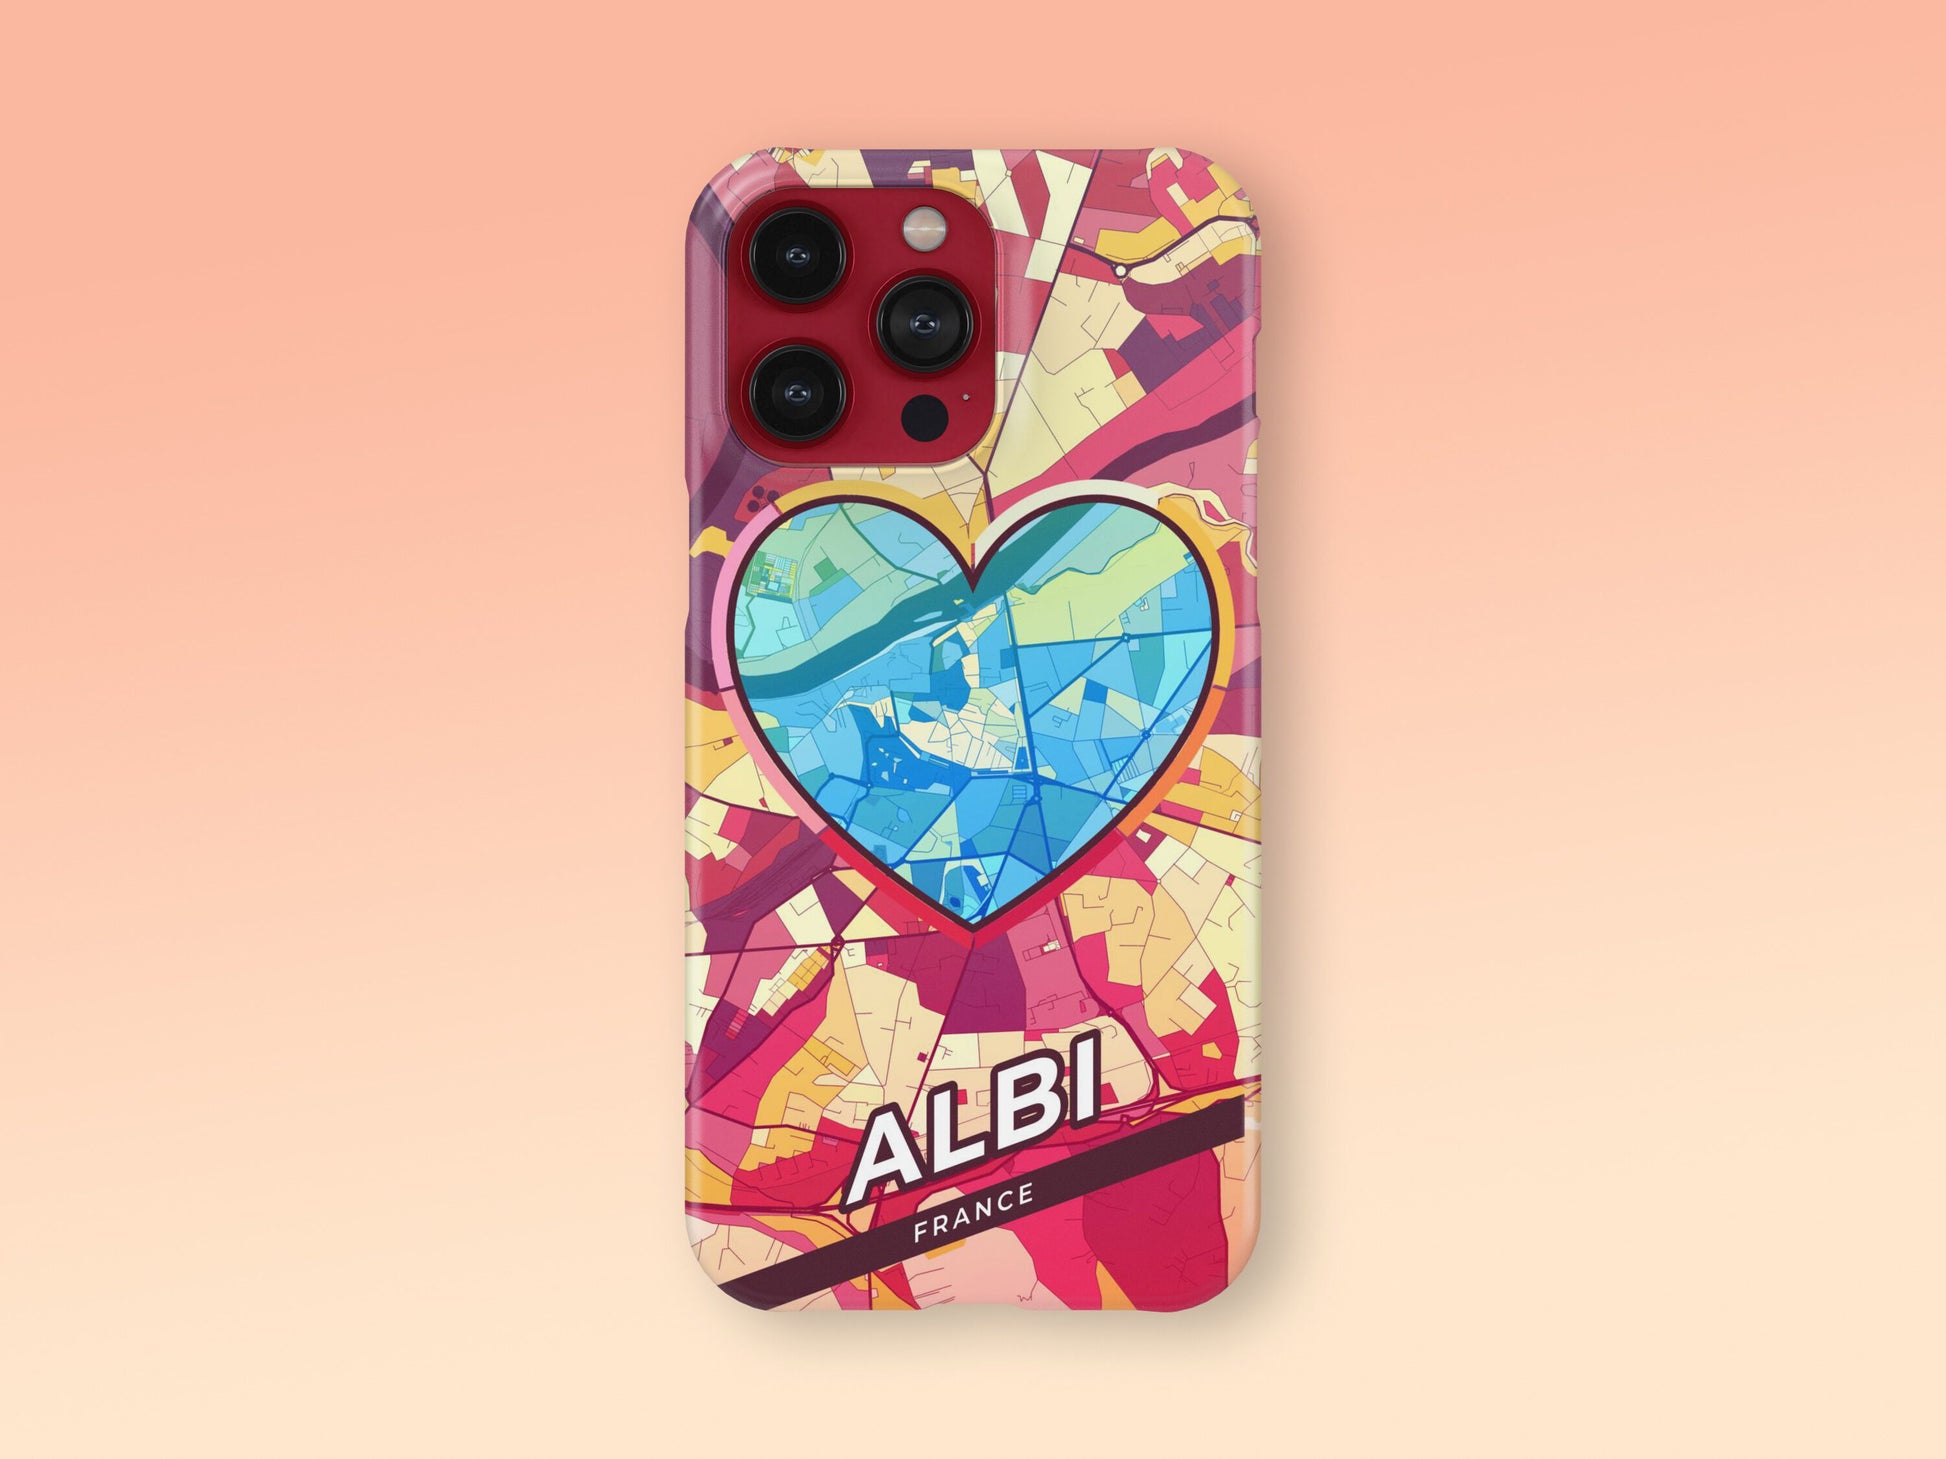 Albi France slim phone case with colorful icon. Birthday, wedding or housewarming gift. Couple match cases. 2